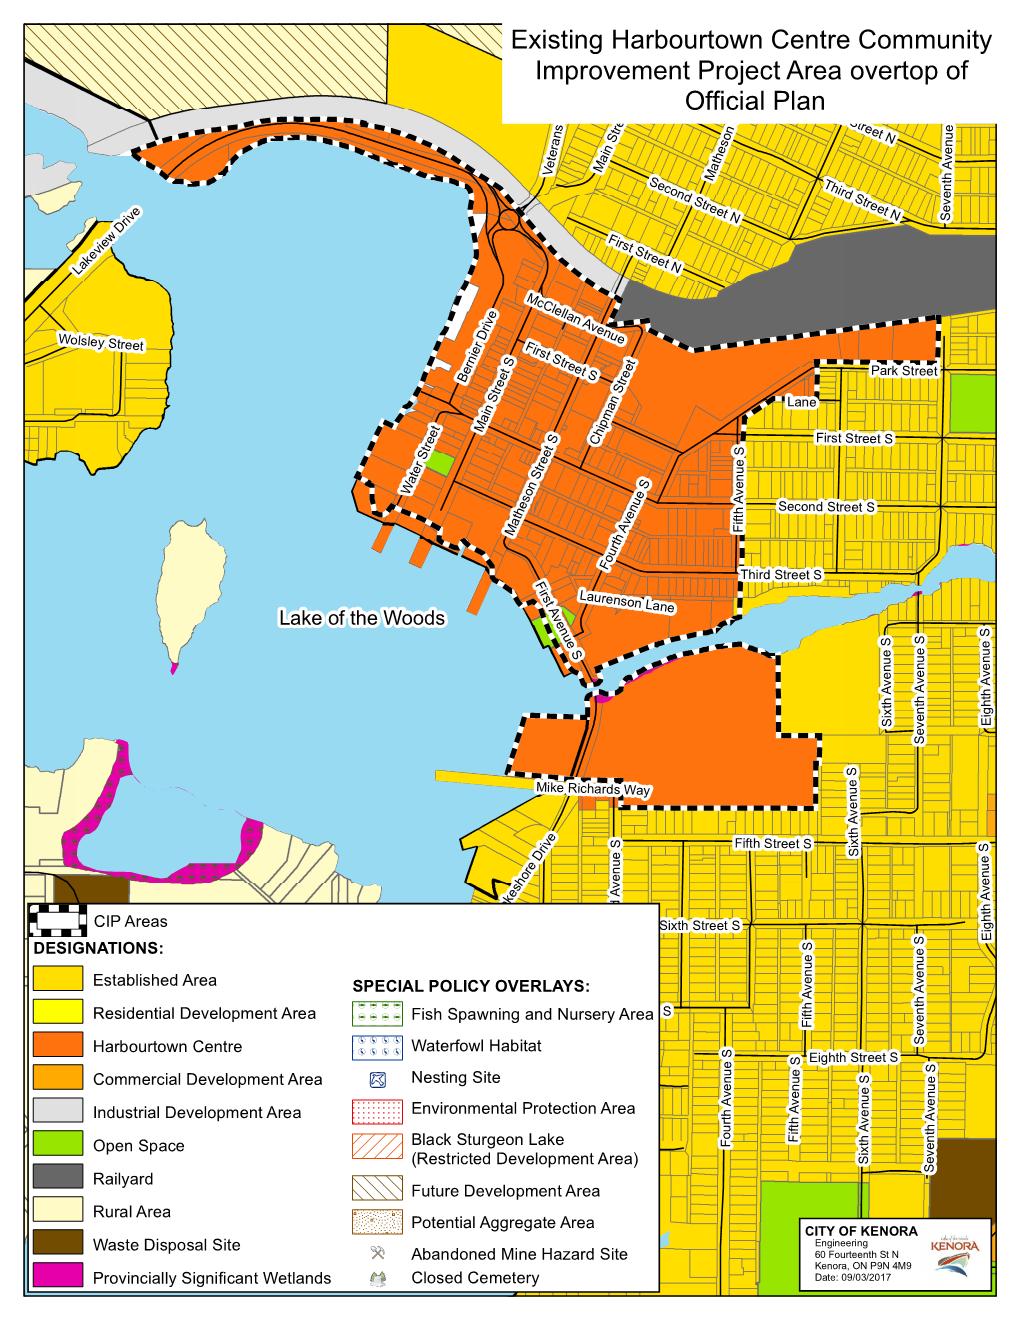 Figure 5: Extract from Official Plan Schedule A - Land Use Designations.